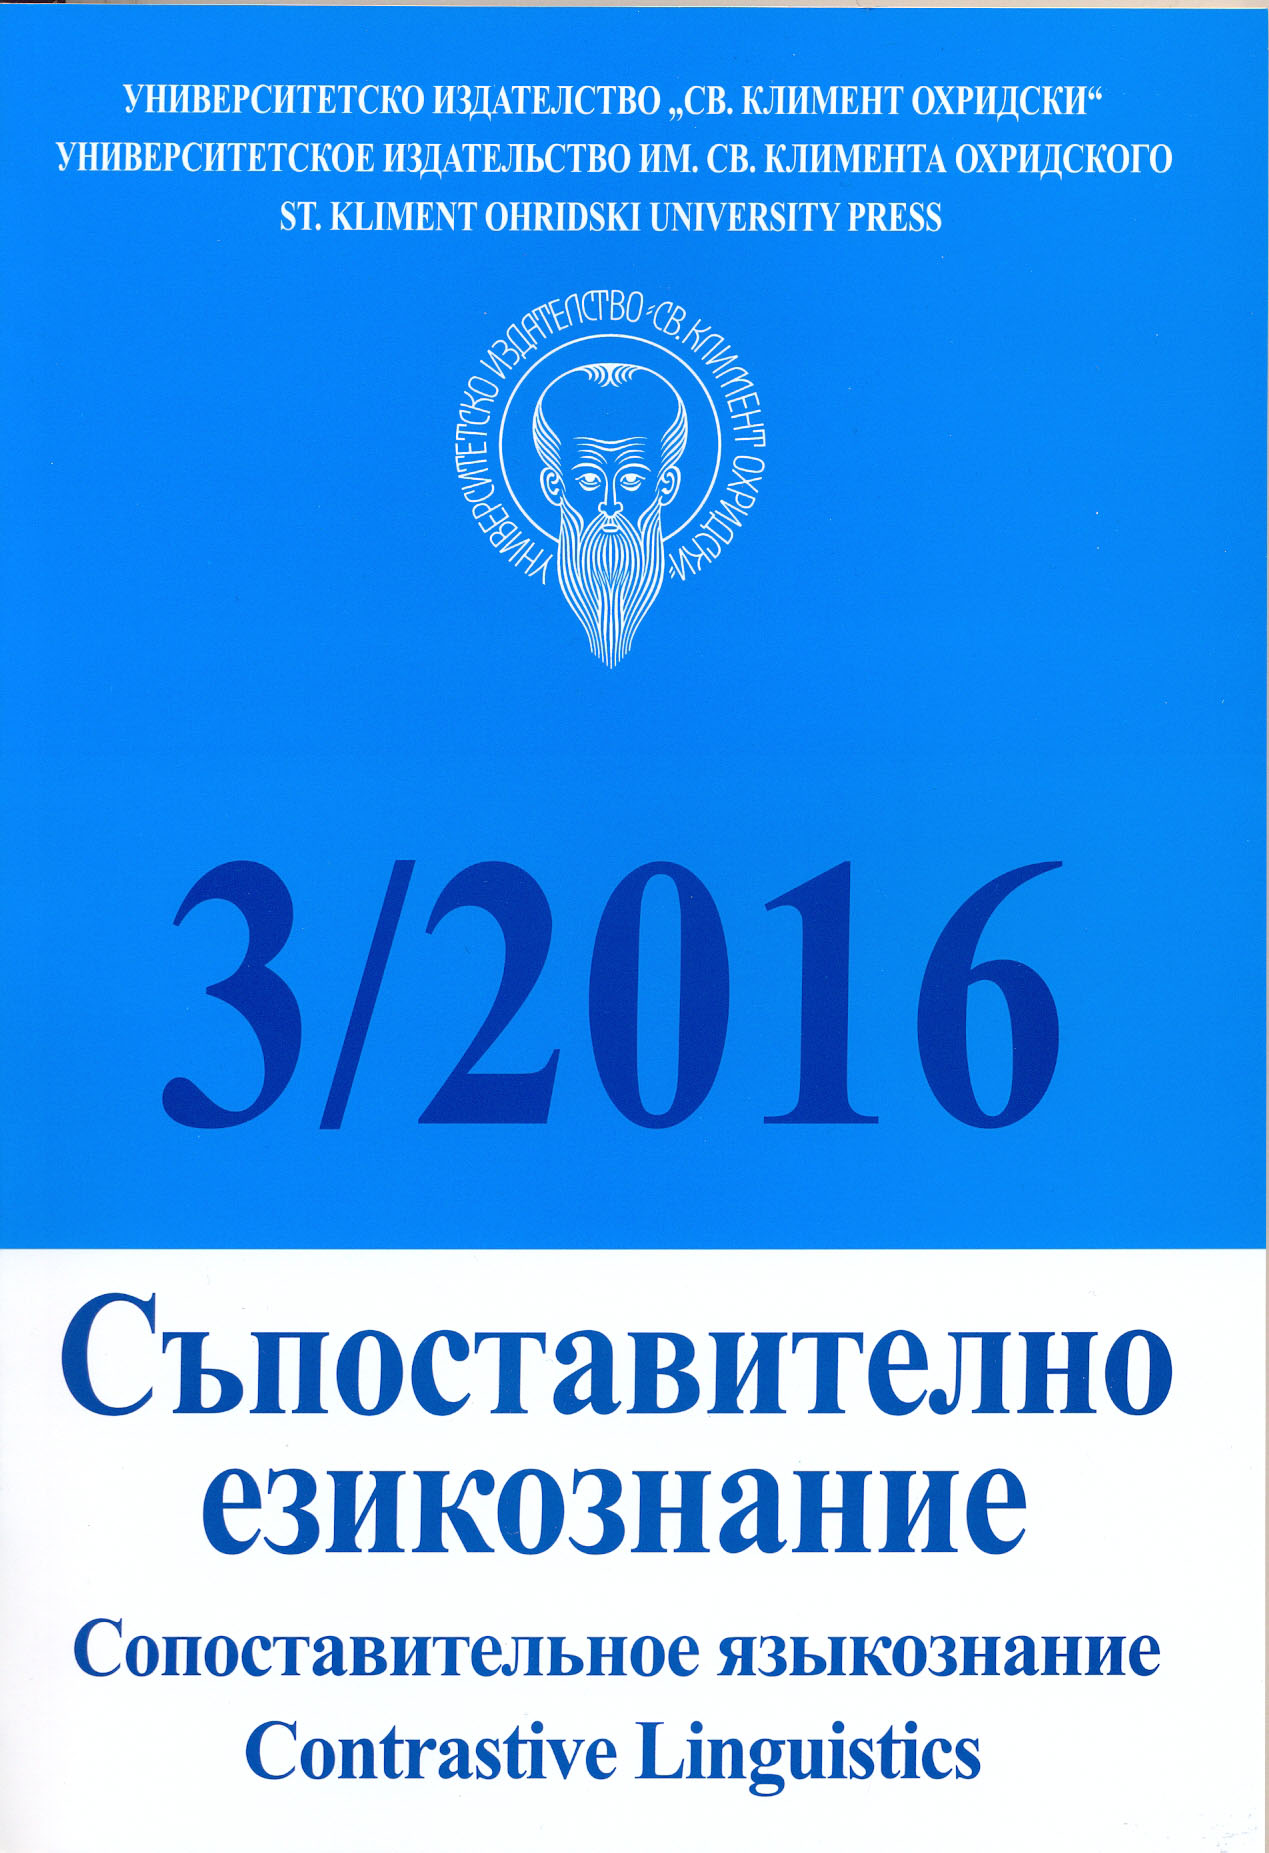 International Symposium on etymology "On the trail of etymological thought" (Krakow, 25-27 May 2016) Cover Image